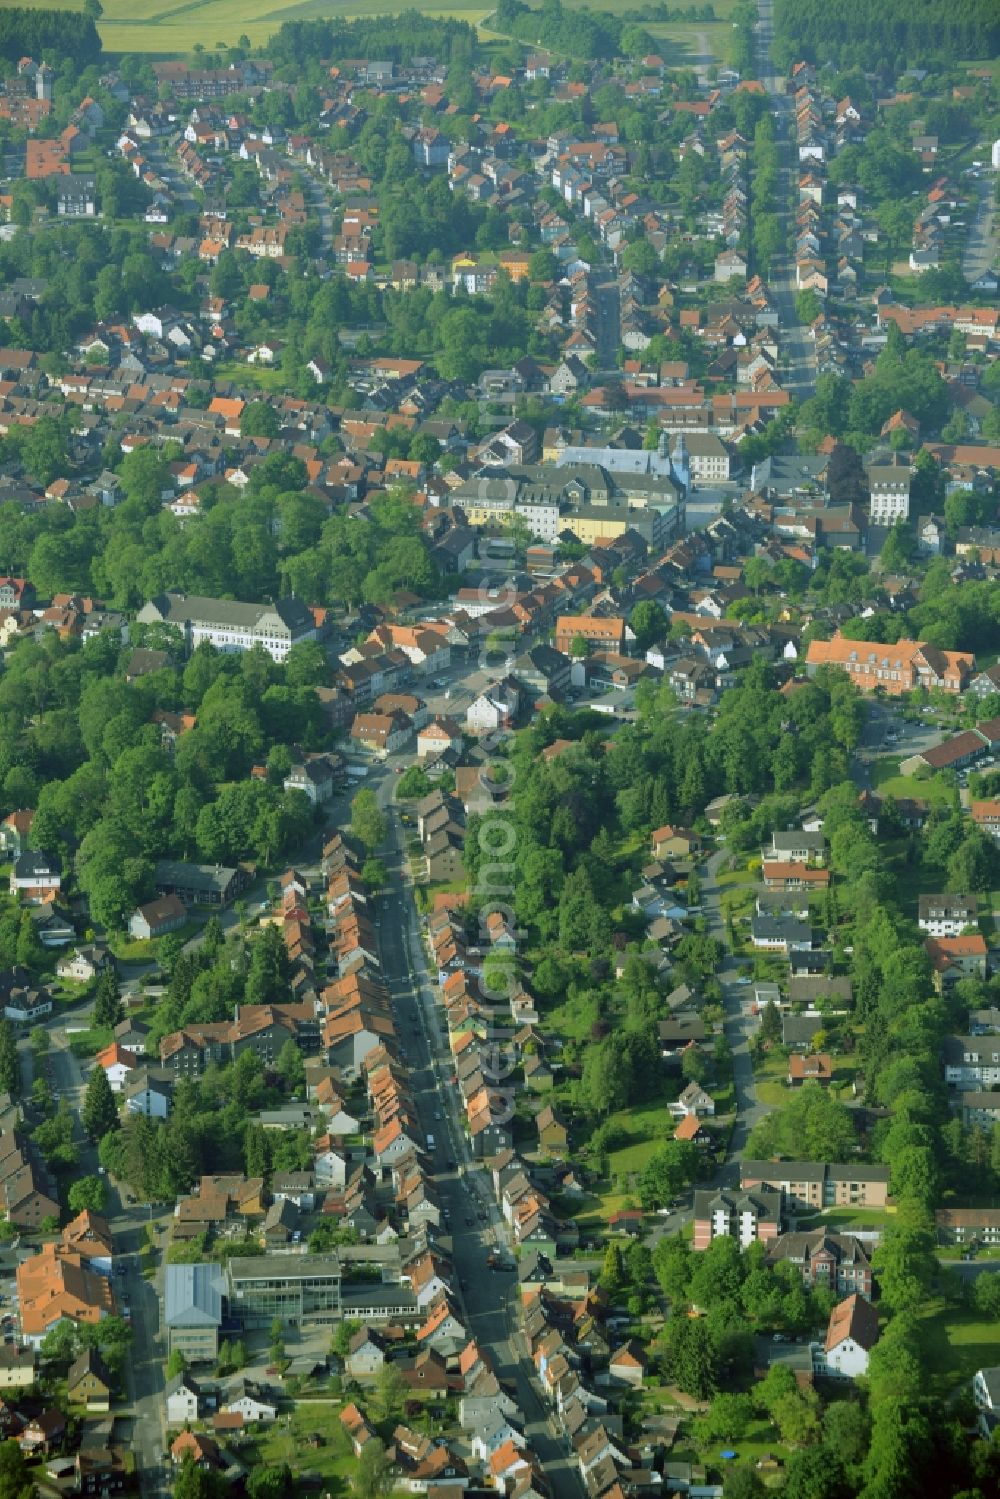 Clausthal-Zellerfeld from above - View of the Southwest of the town of Clausthal-Zellerfeld in the state of Lower Saxony. The mountain and university town is an official spa resort in the county district of Goslar. A residential area is located in its Southwest. View along Adolph-Roemer-Strasse where the church Marktkirche zum Heiligen Geist is located